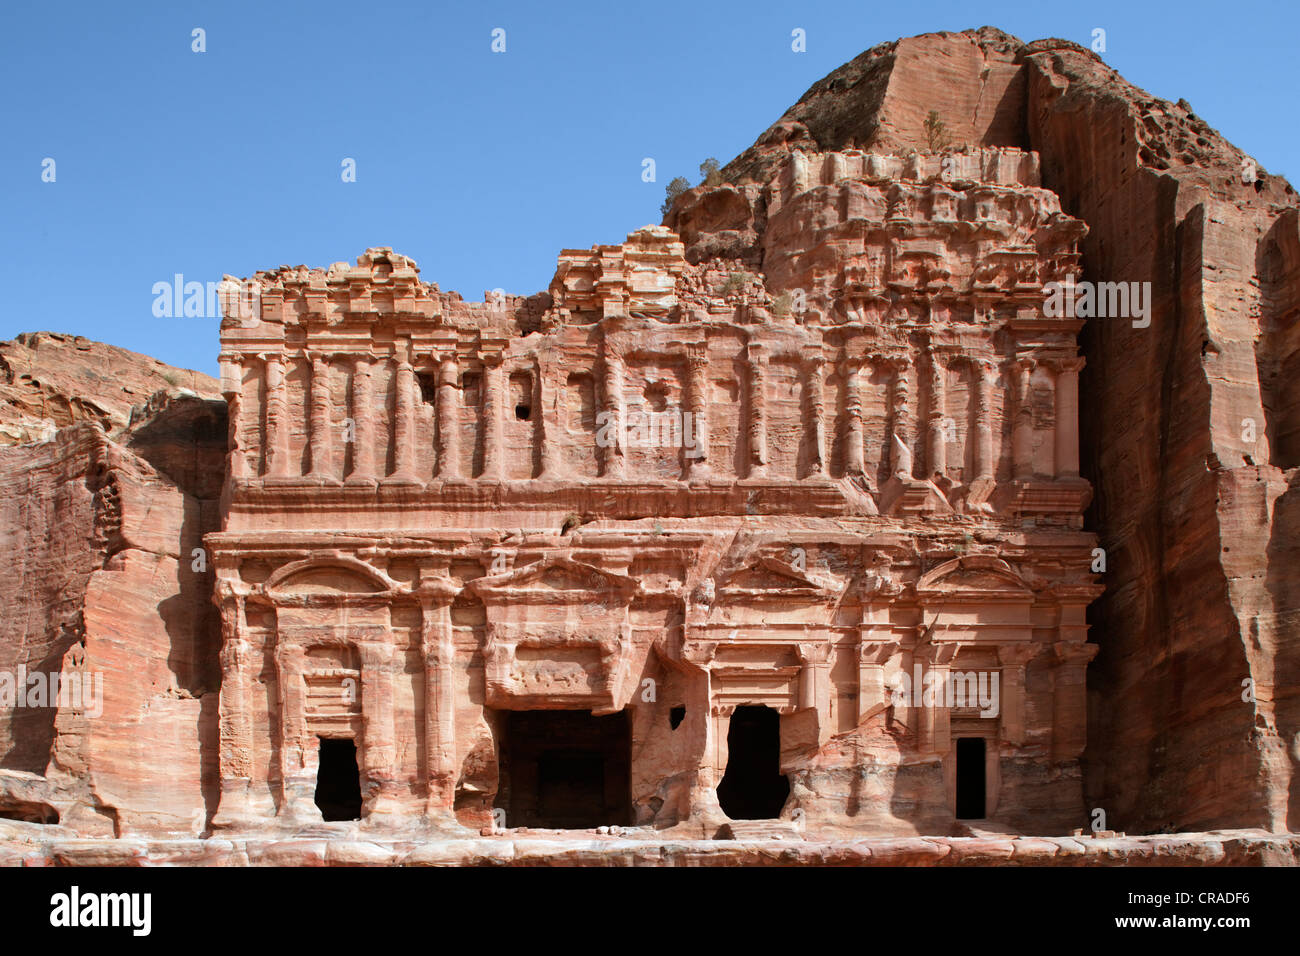 Palace Tomb, with pilasters, engaged columns, Petra, the capital city of the Nabataeans, rock city, UNESCO World Hertage Site Stock Photo